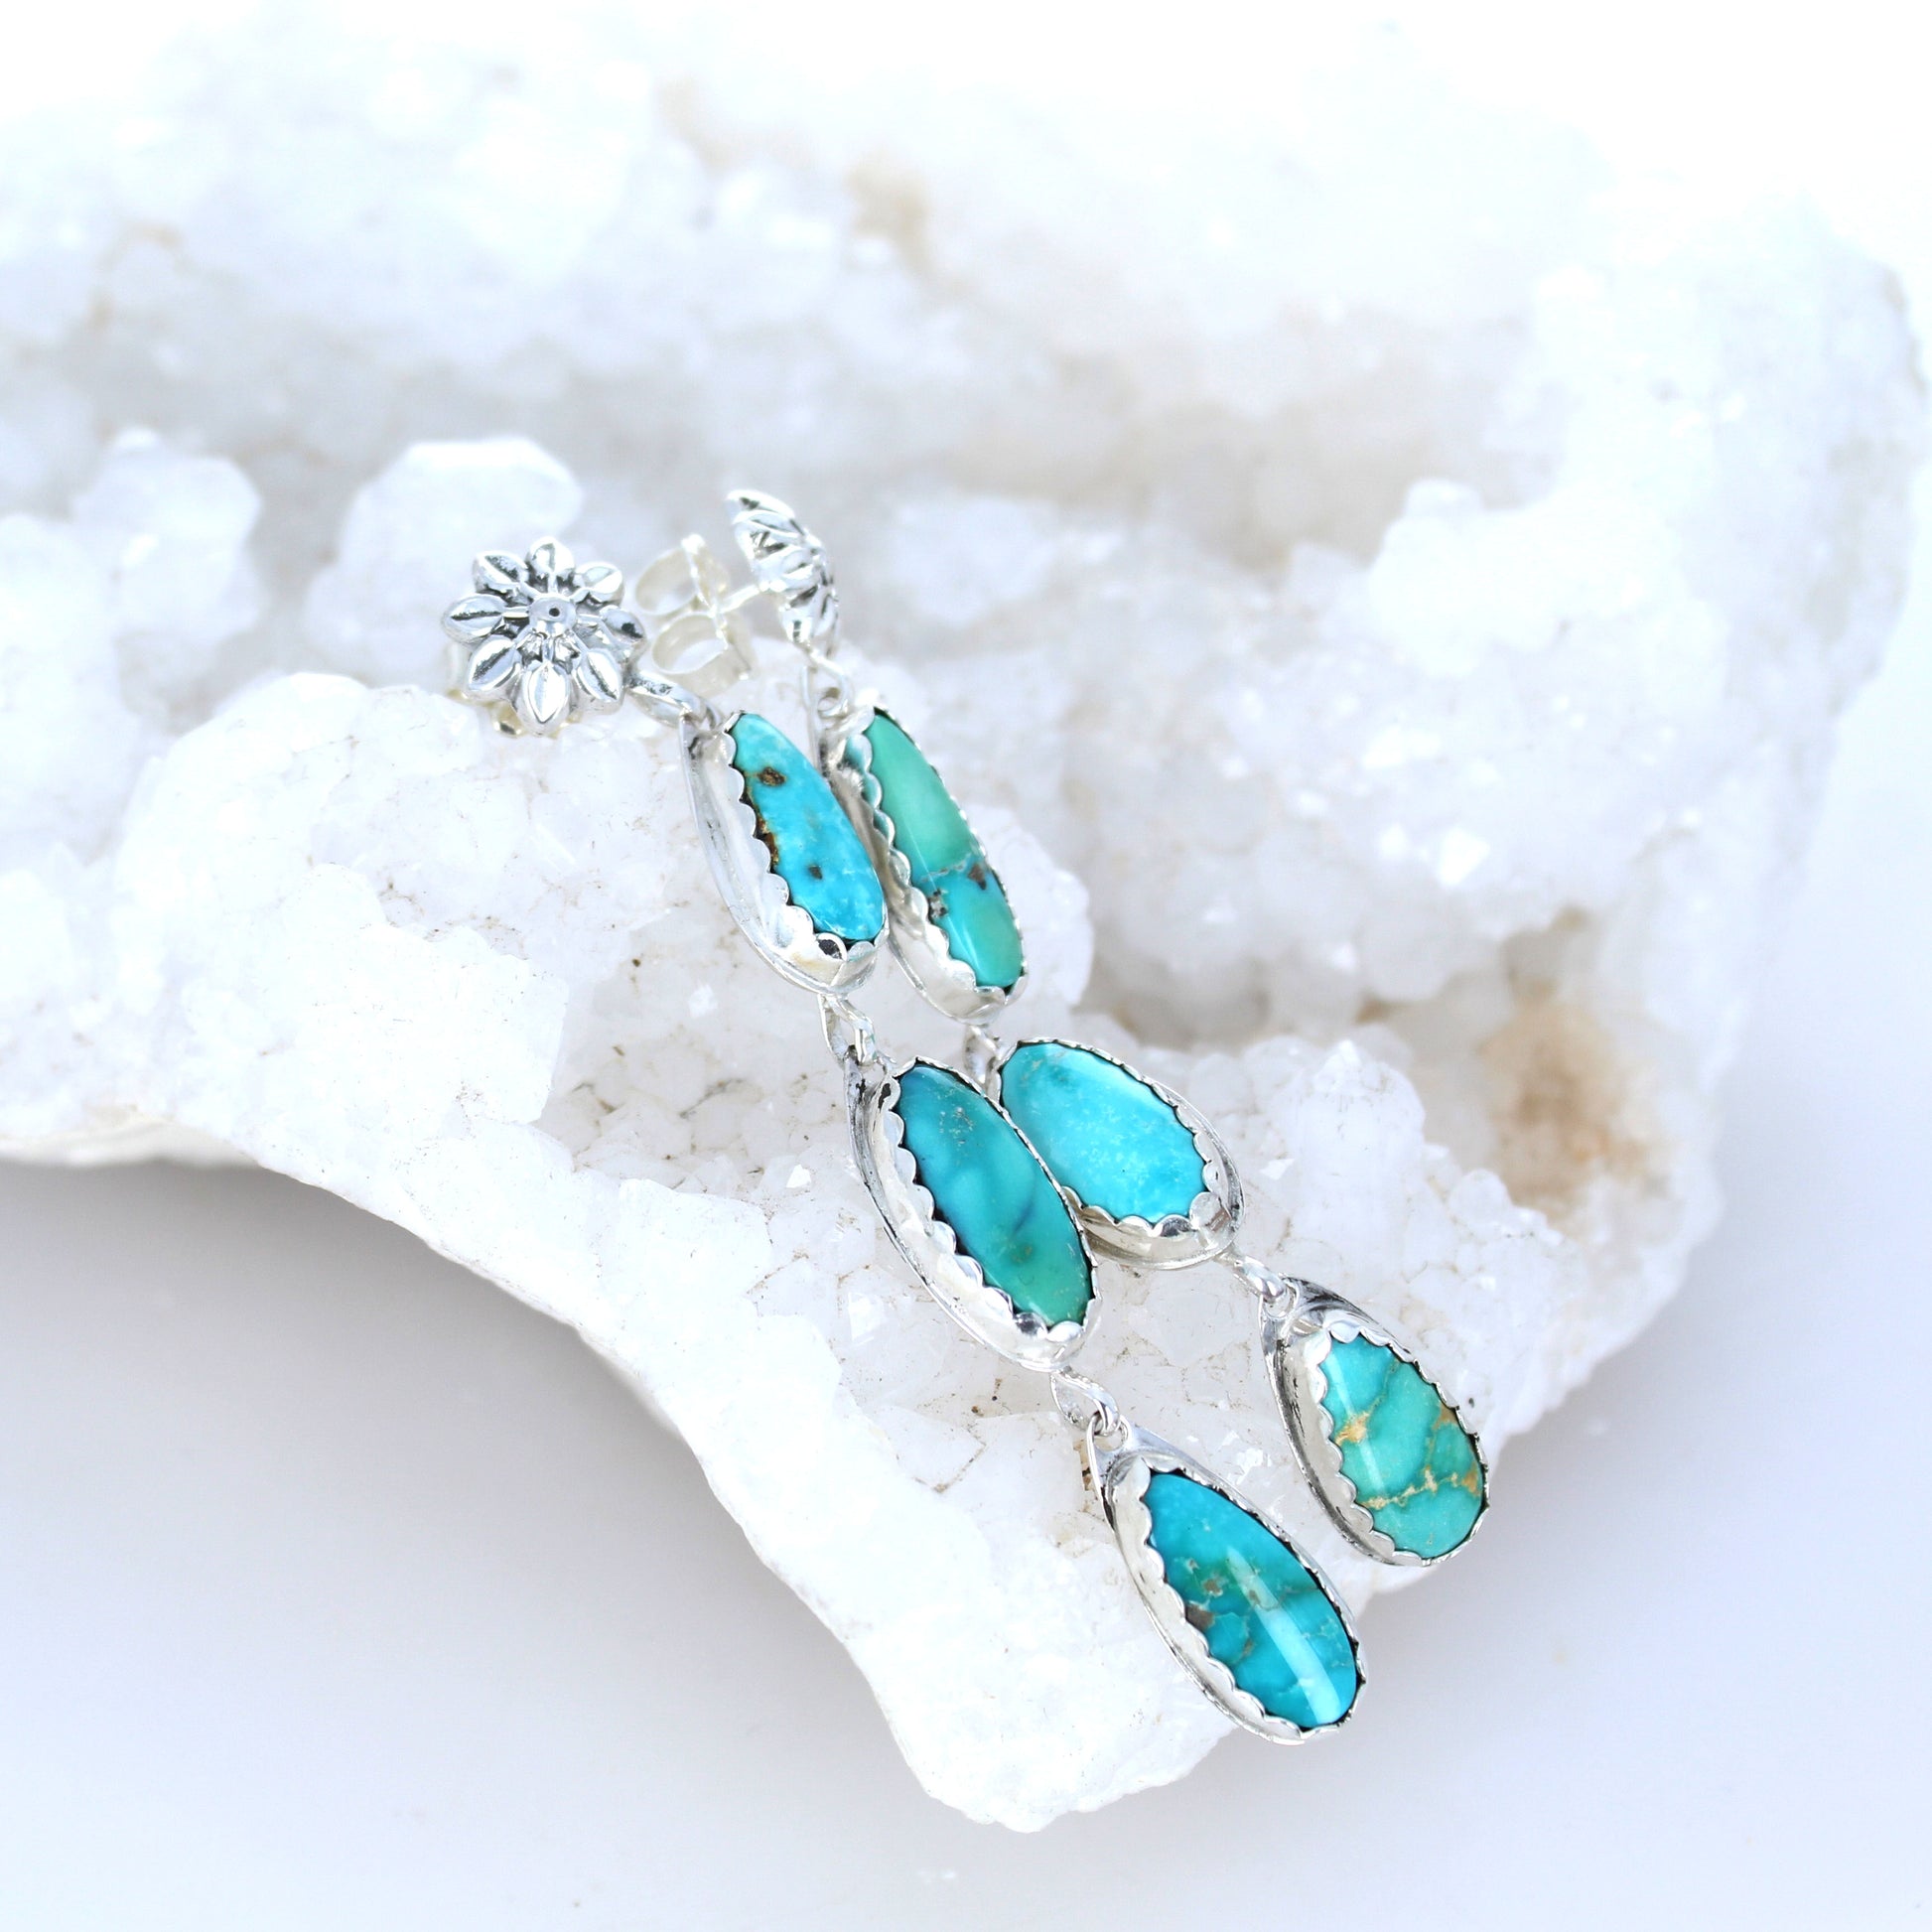 Emerald Valley Turquoise Earrings 3 Stone Dangles Floral Post -NewWorldGems